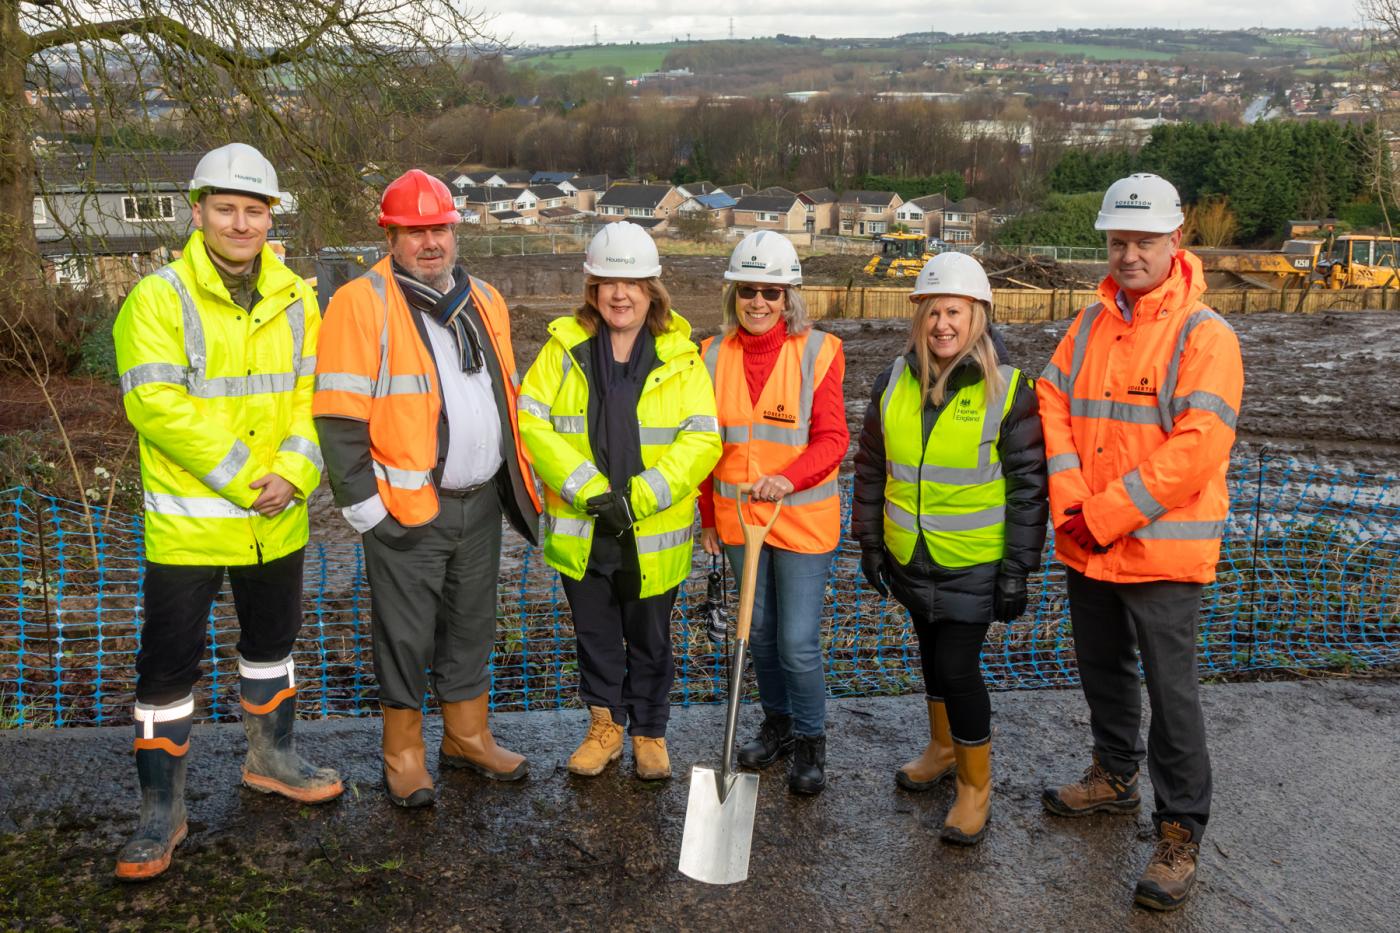 Representatives from Robertson, Kirklees Council, Housing 21 and Homes England at a ground-breaking event for an extra care scheme development in Cleckheaton, Kirklees